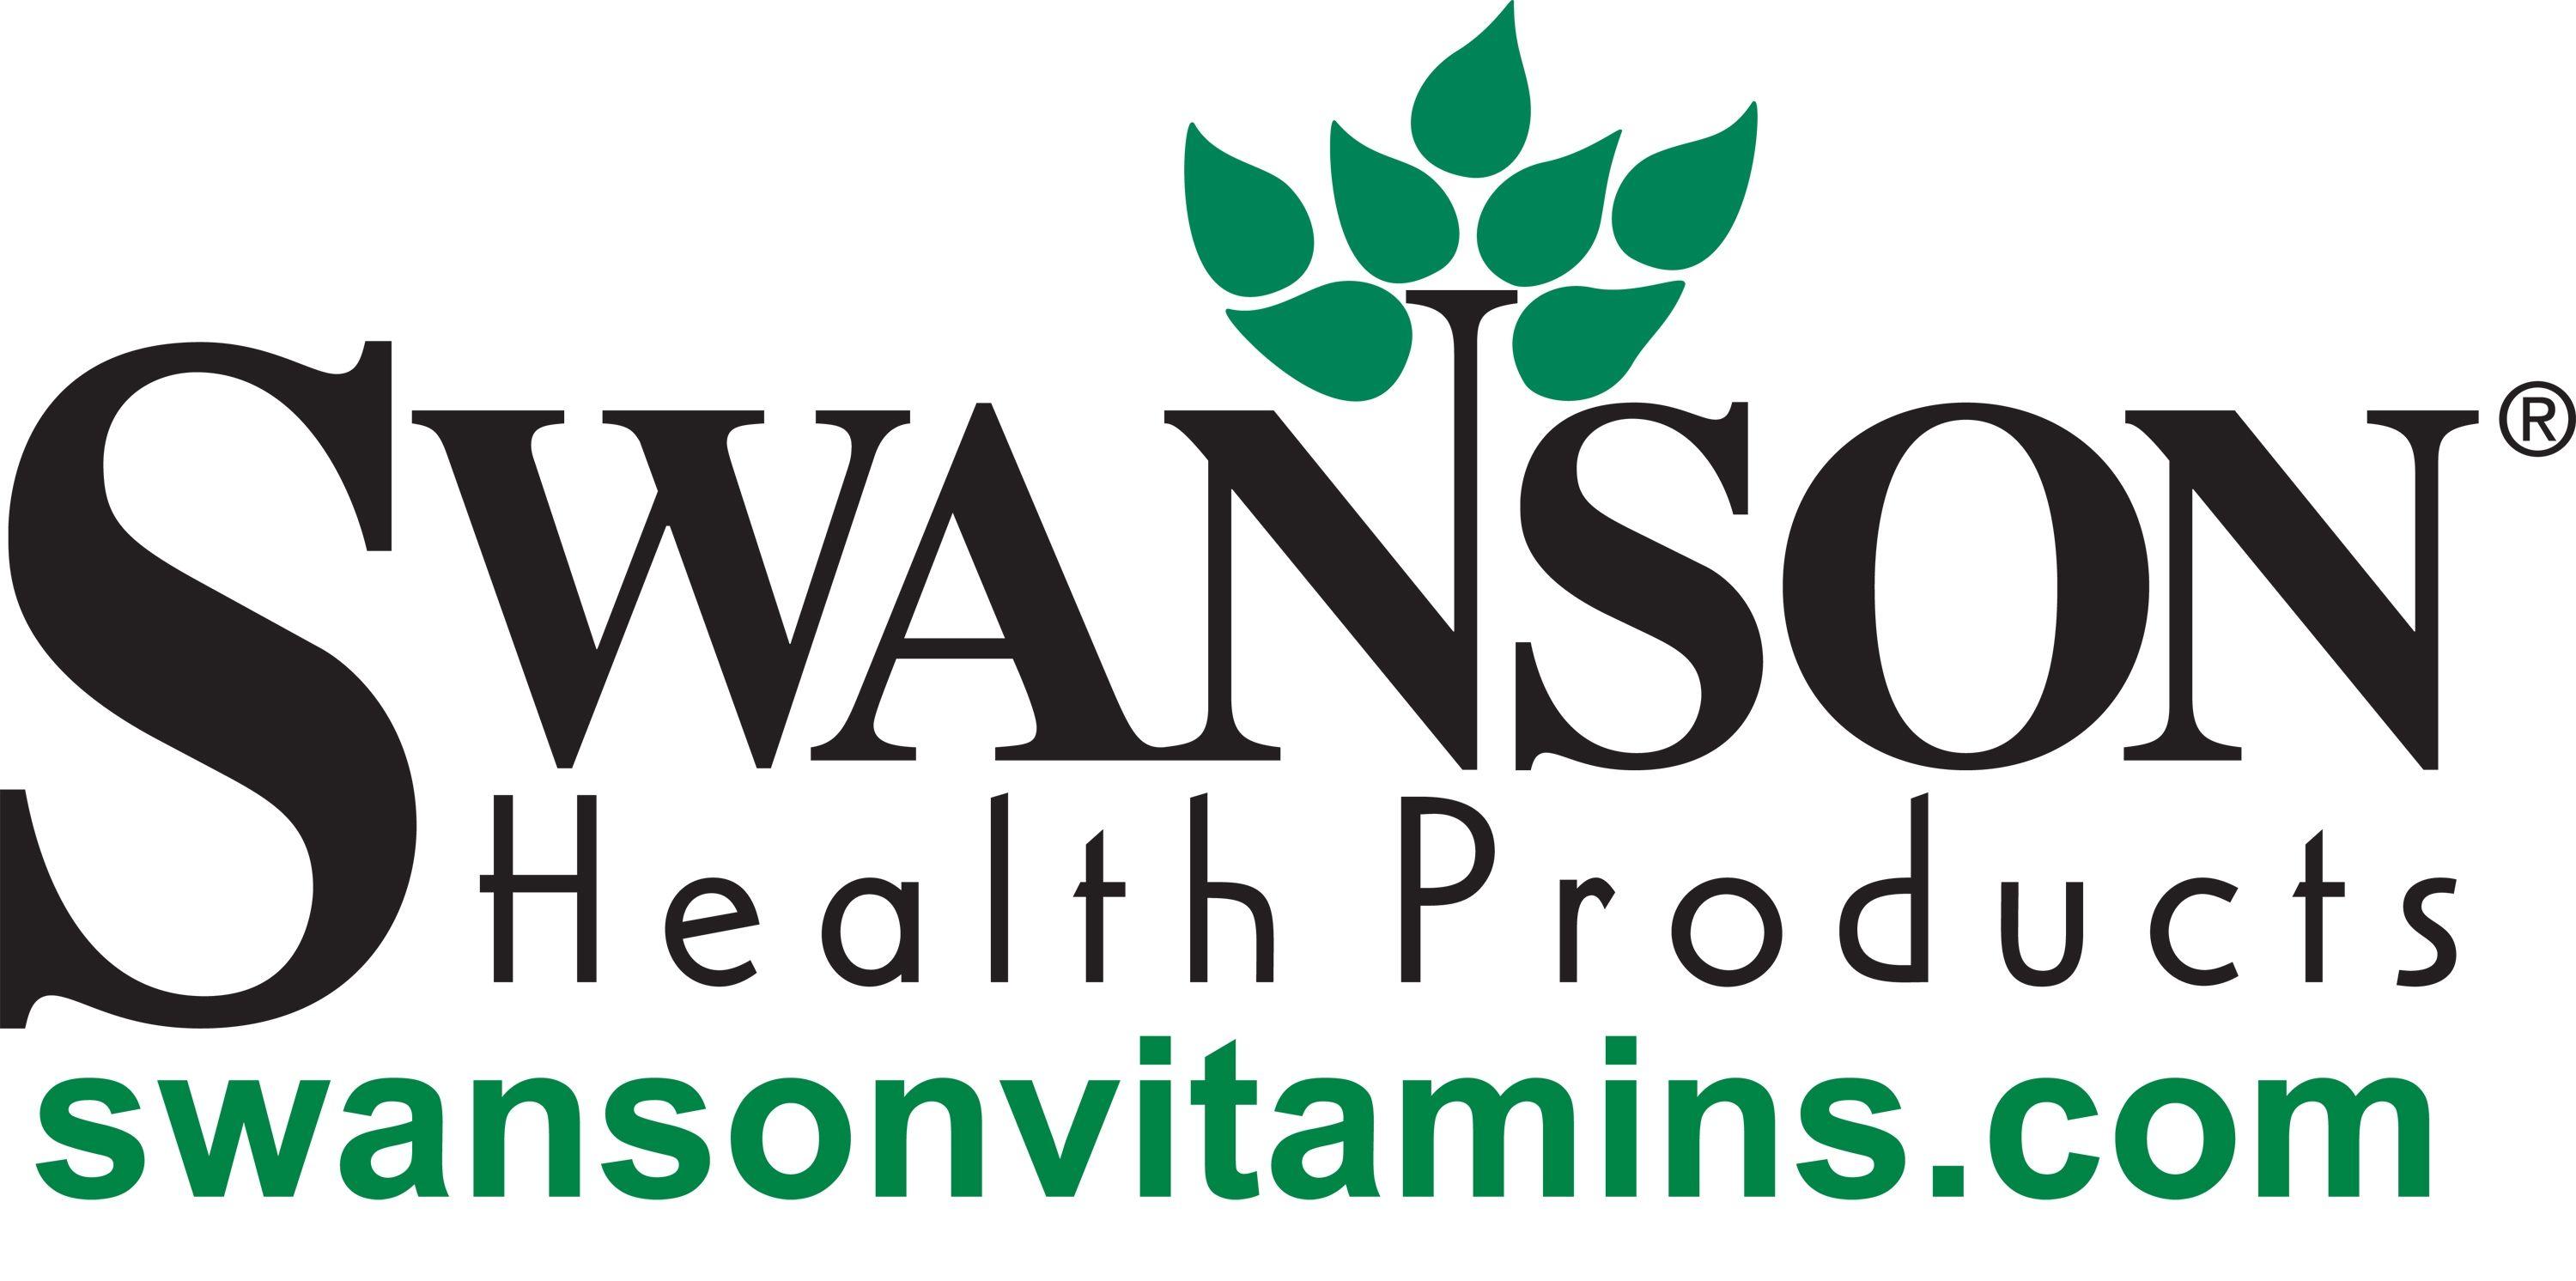 Swanson Logo - Swanson Health Products: $5 Off Coupon Code :: Southern Savers